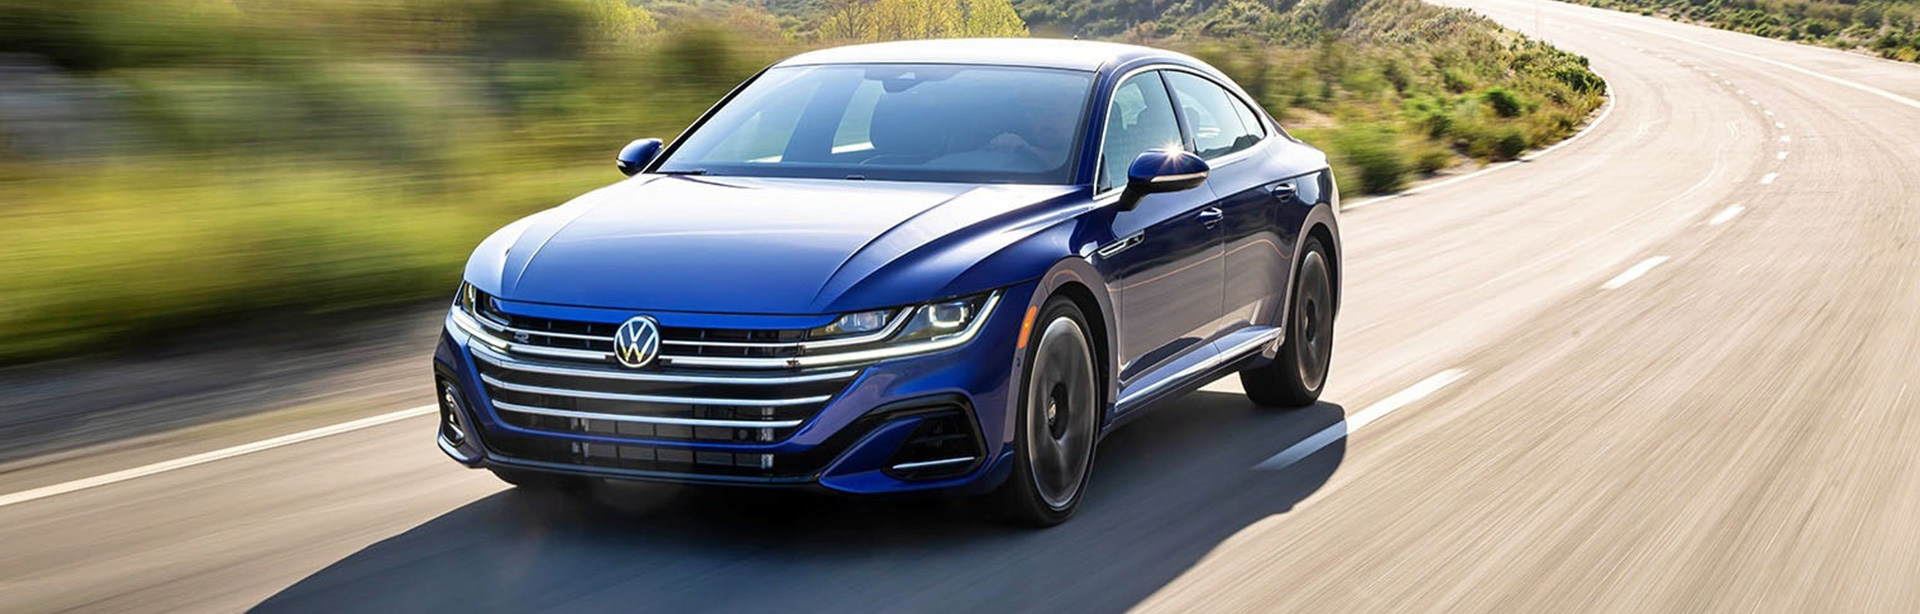 Volkswagen Arteon Is Heading for the Chopping Block